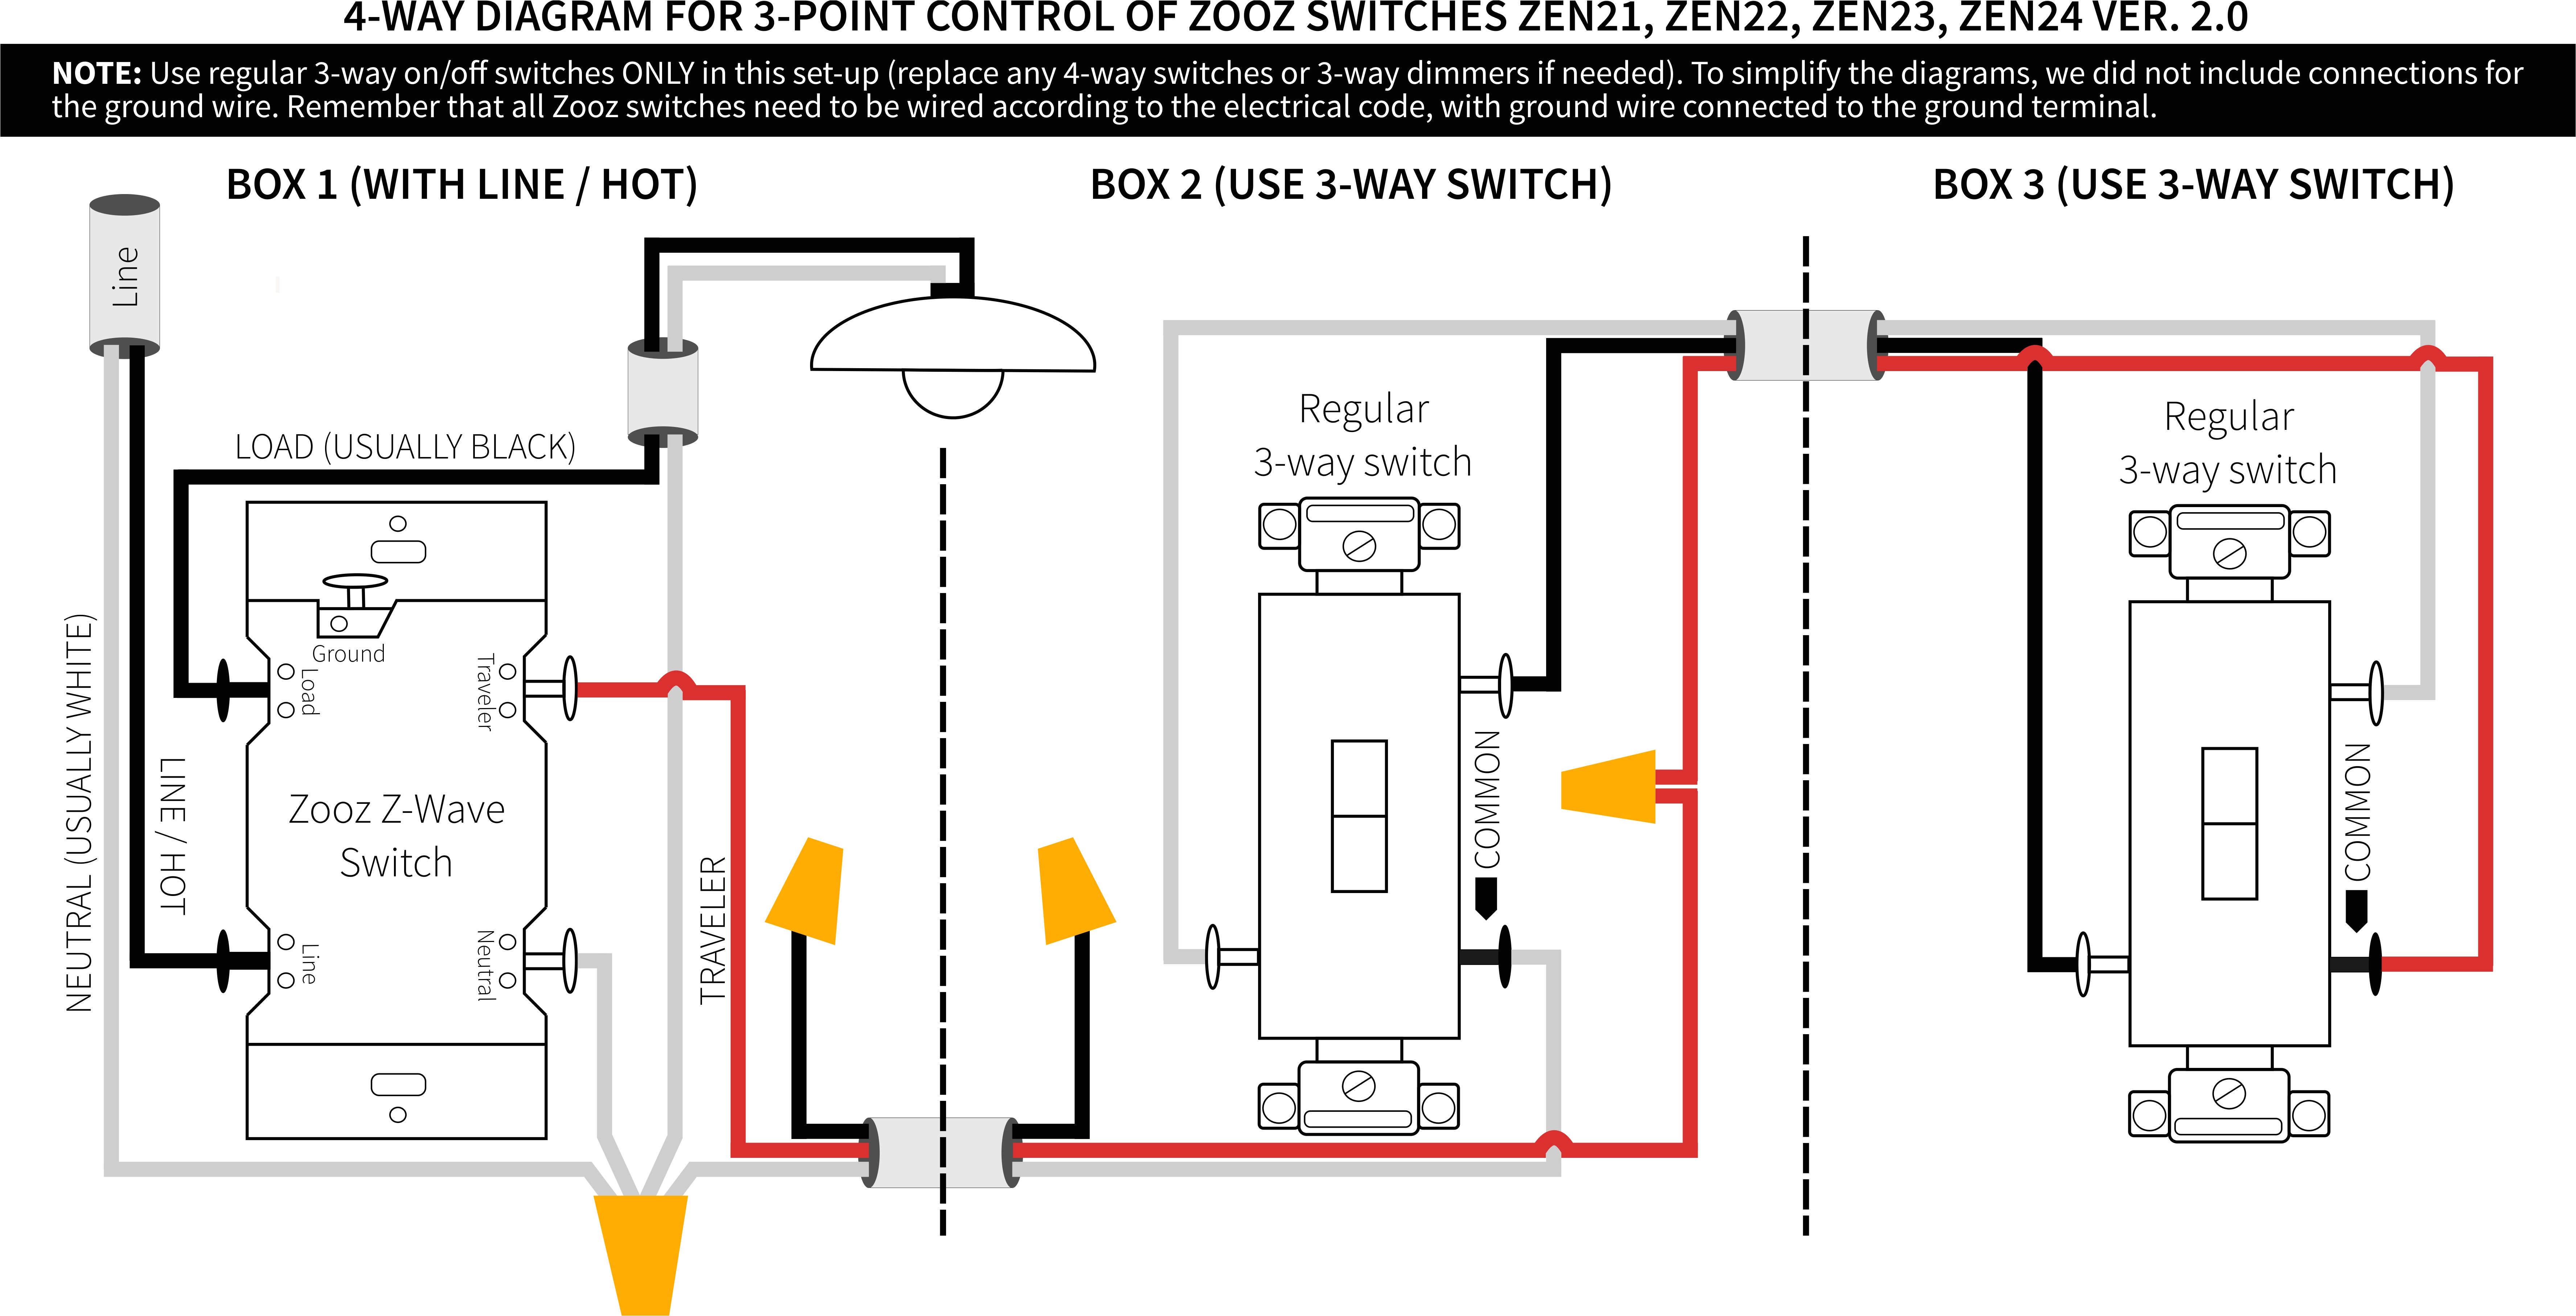 wiring diagrams 4 way dimmer switch lutron throughout 3 and within in diagram jpg